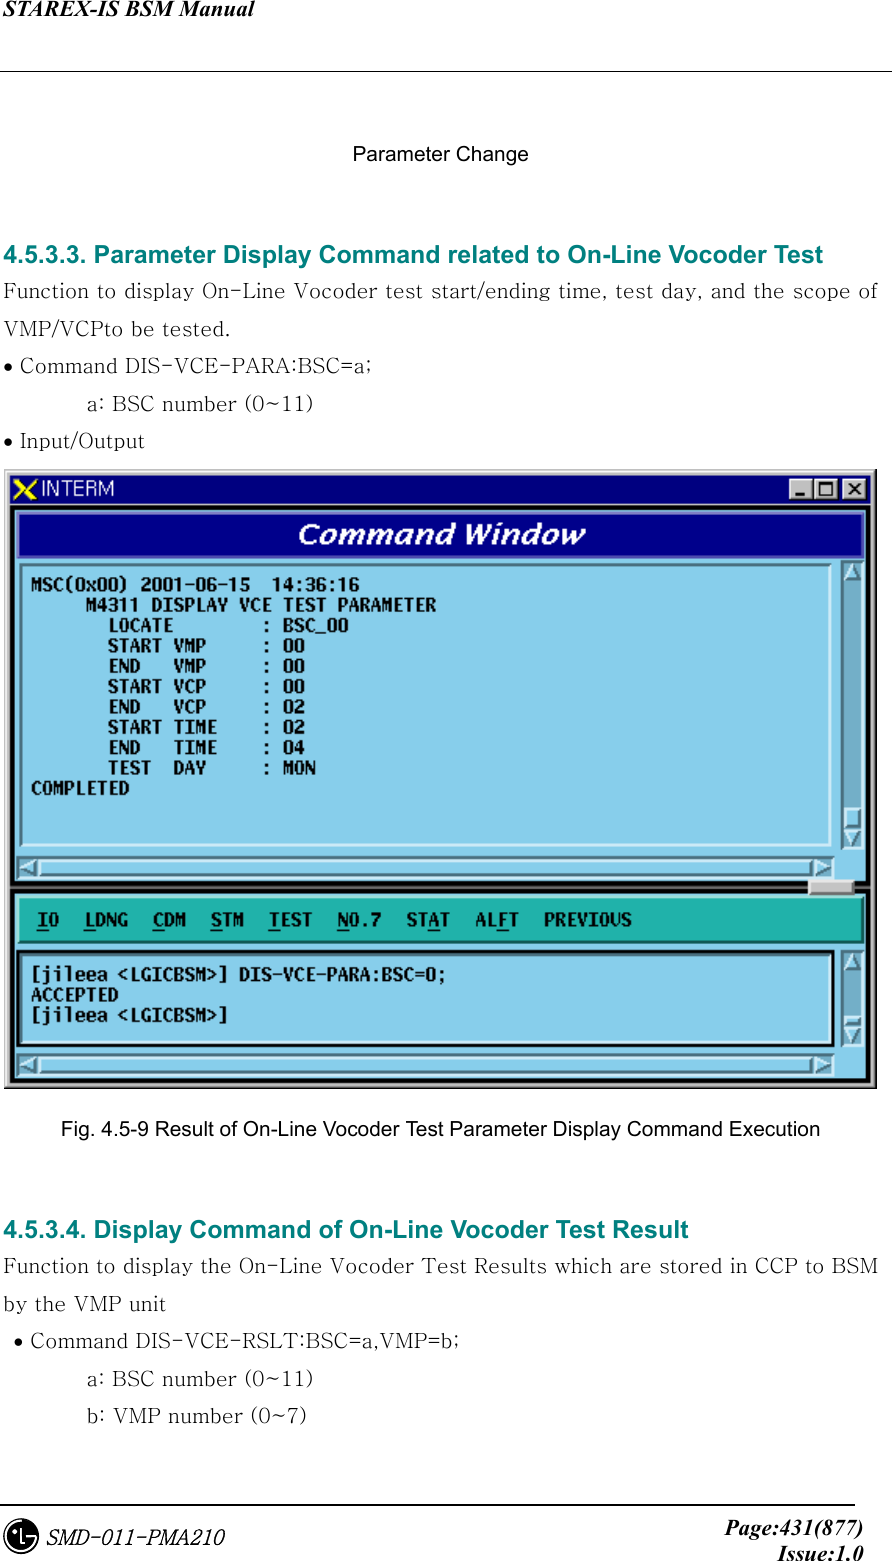 STAREX-IS BSM Manual     Page:431(877)Issue:1.0SMD-011-PMA210  Parameter Change  4.5.3.3. Parameter Display Command related to On-Line Vocoder Test   Function to display On-Line Vocoder test start/ending time, test day, and the scope of VMP/VCPto be tested.   • Command DIS-VCE-PARA:BSC=a;   a: BSC number (0~11) • Input/Output  Fig. 4.5-9 Result of On-Line Vocoder Test Parameter Display Command Execution  4.5.3.4. Display Command of On-Line Vocoder Test Result Function to display the On-Line Vocoder Test Results which are stored in CCP to BSM by the VMP unit  • Command DIS-VCE-RSLT:BSC=a,VMP=b;   a: BSC number (0~11)   b: VMP number (0~7) 